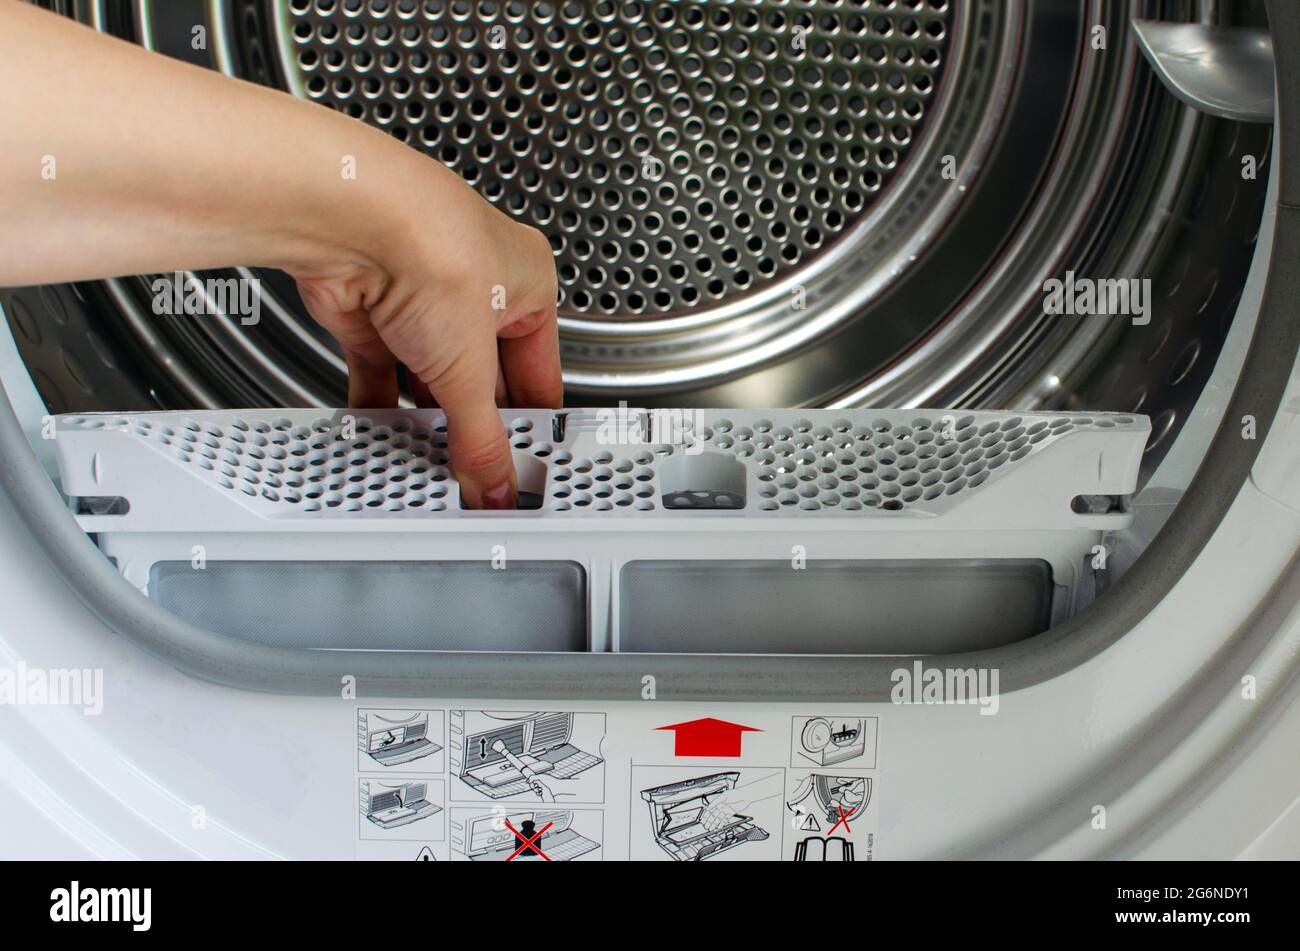 https://c8.alamy.com/comp/2G6NDY1/a-housewife-holds-a-lint-trap-from-a-front-loading-dryer-a-womans-hand-took-out-the-filter-from-the-dryer-2G6NDY1.jpg